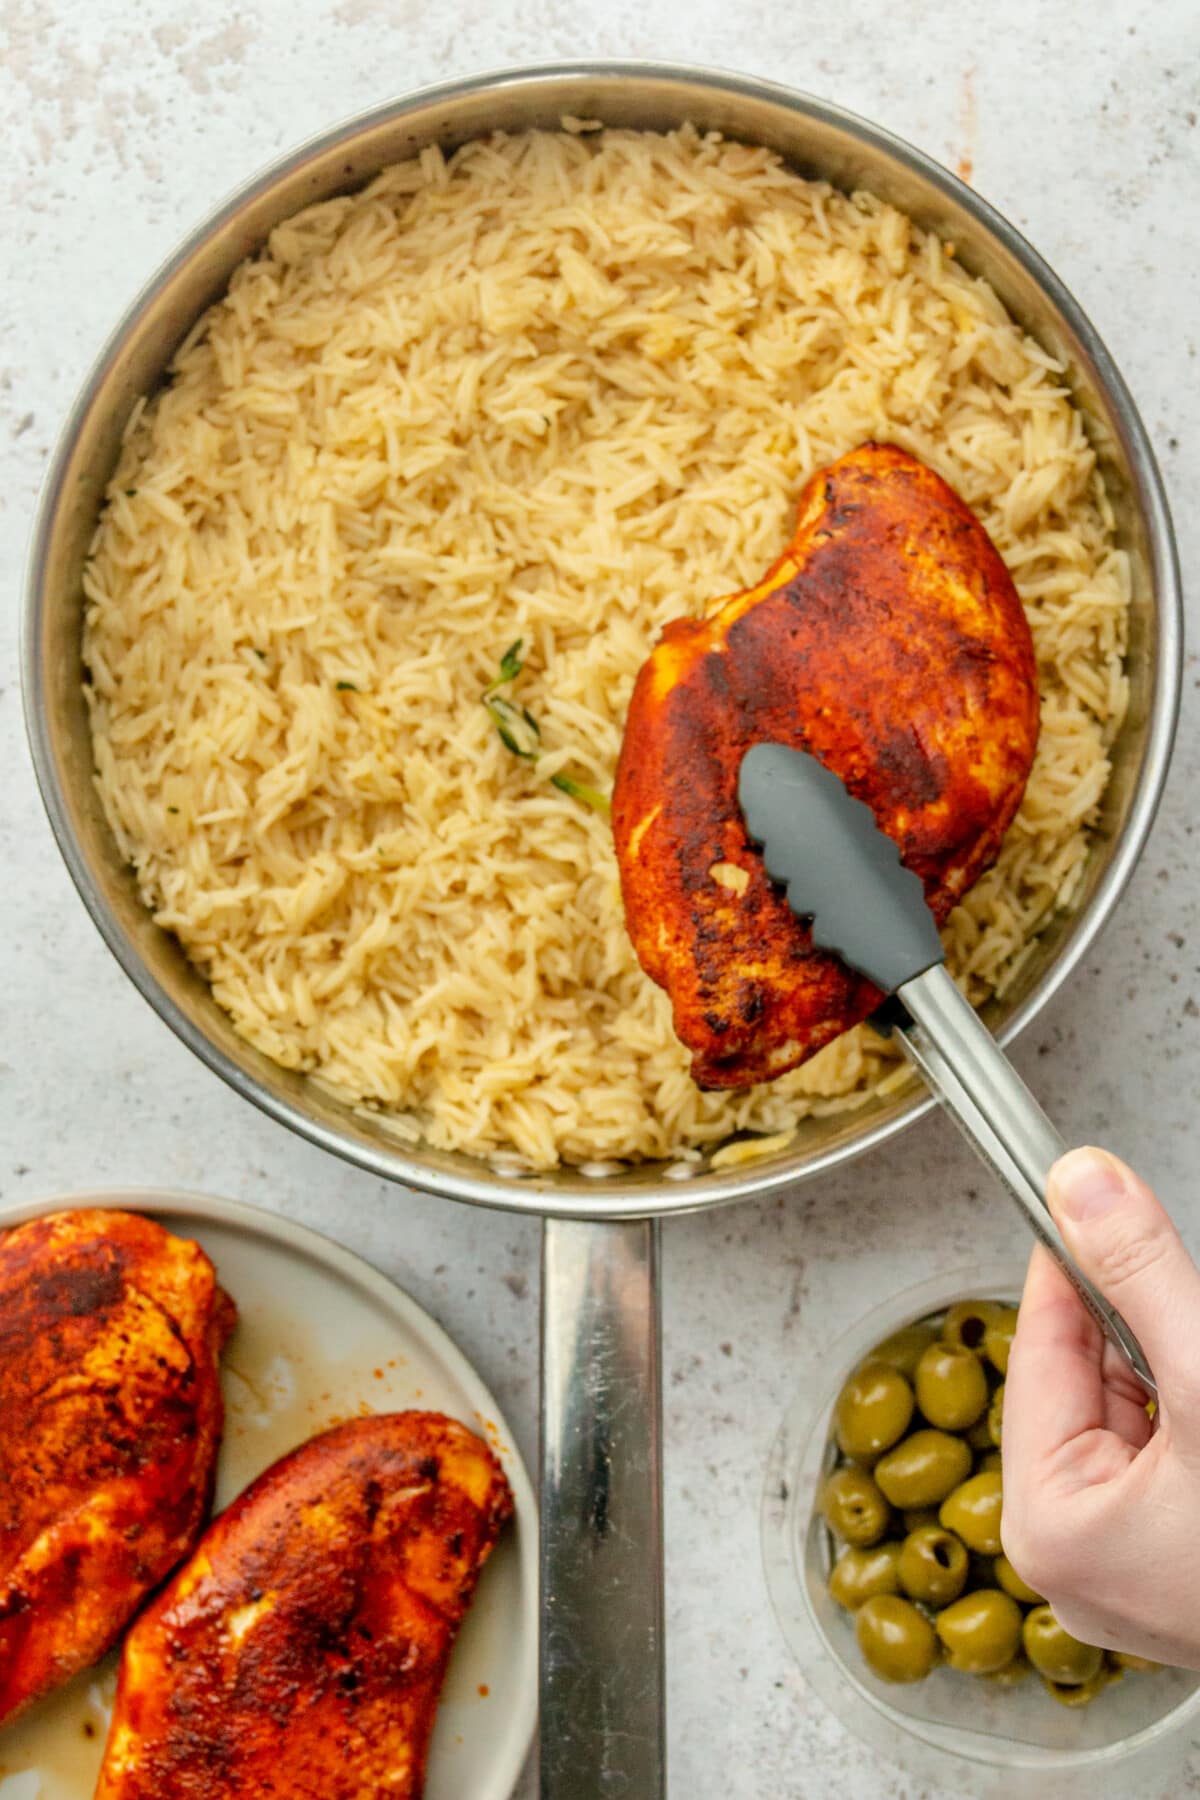 Spiced chicken is placed on top of rice in a stainless steel frying pan on a light grey surface.